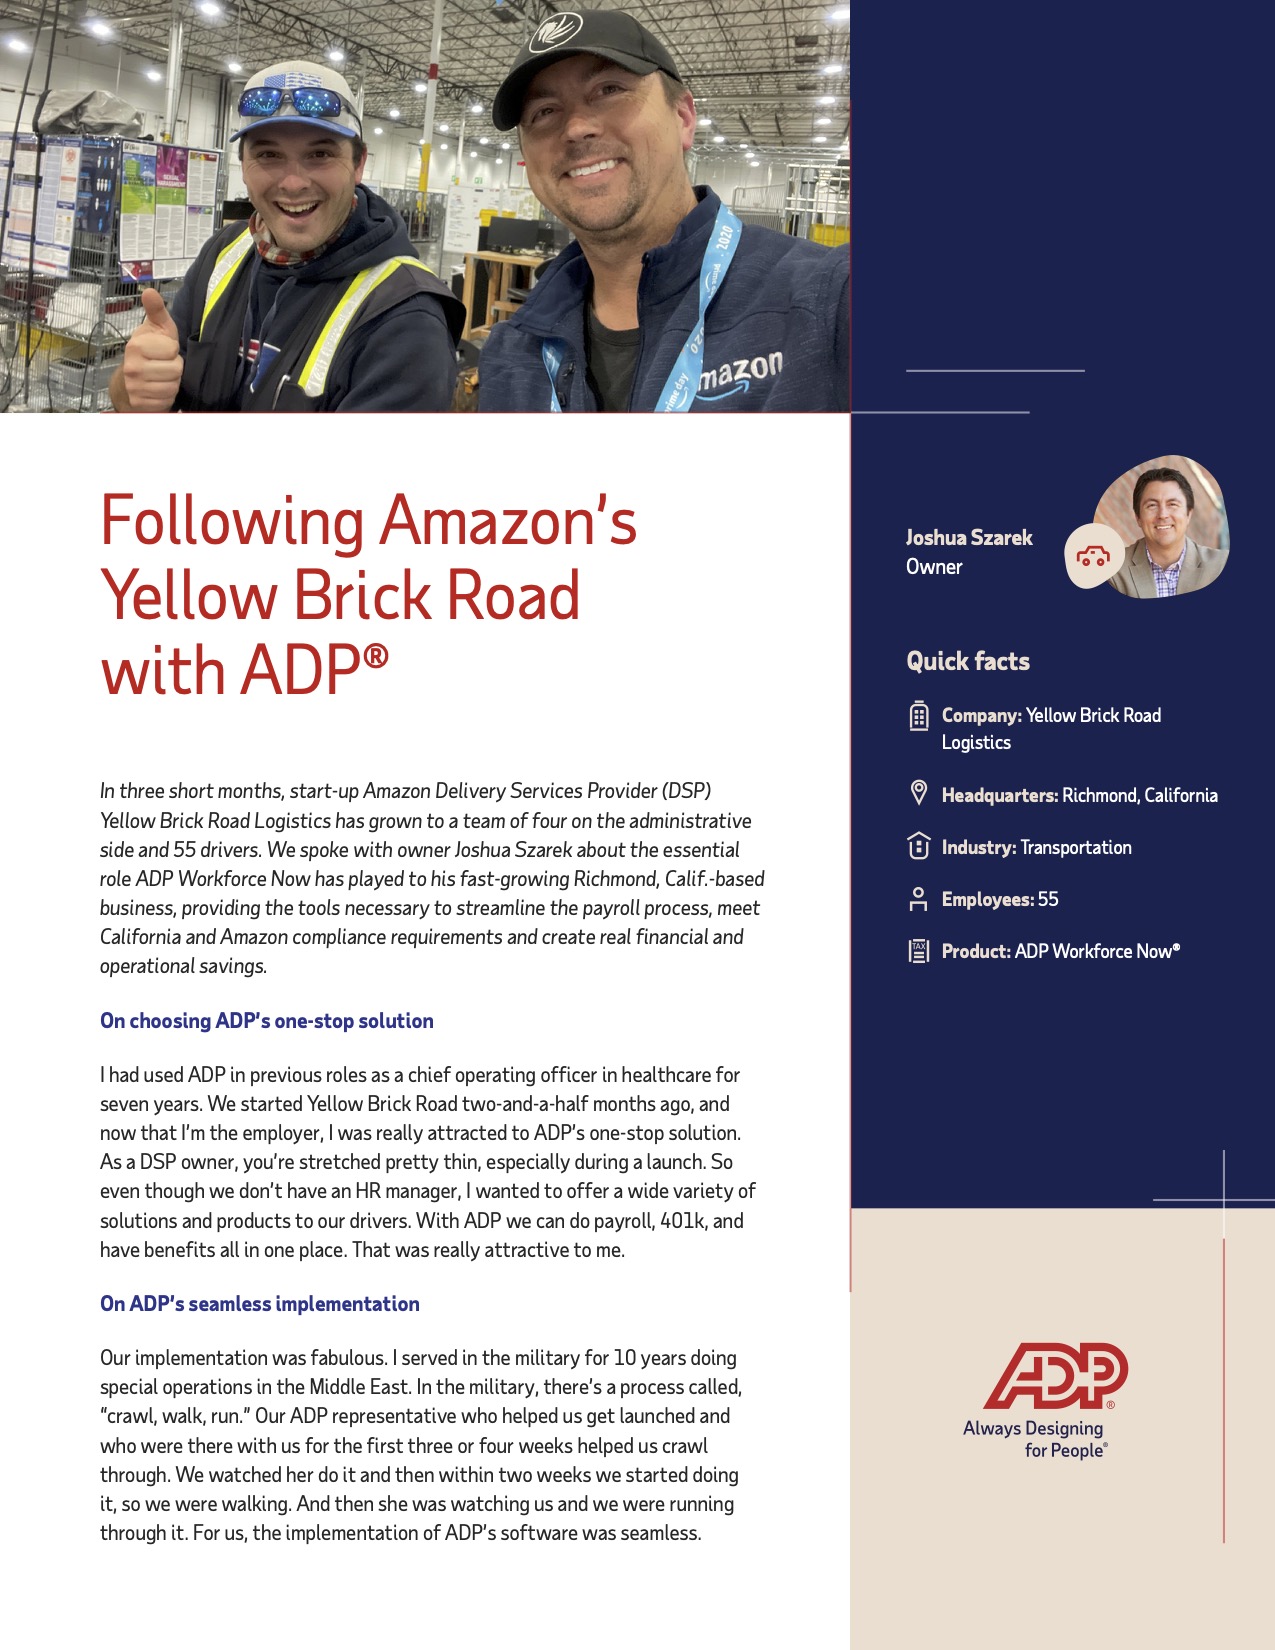 Following Amazon's Yellow Brick Road with ADP